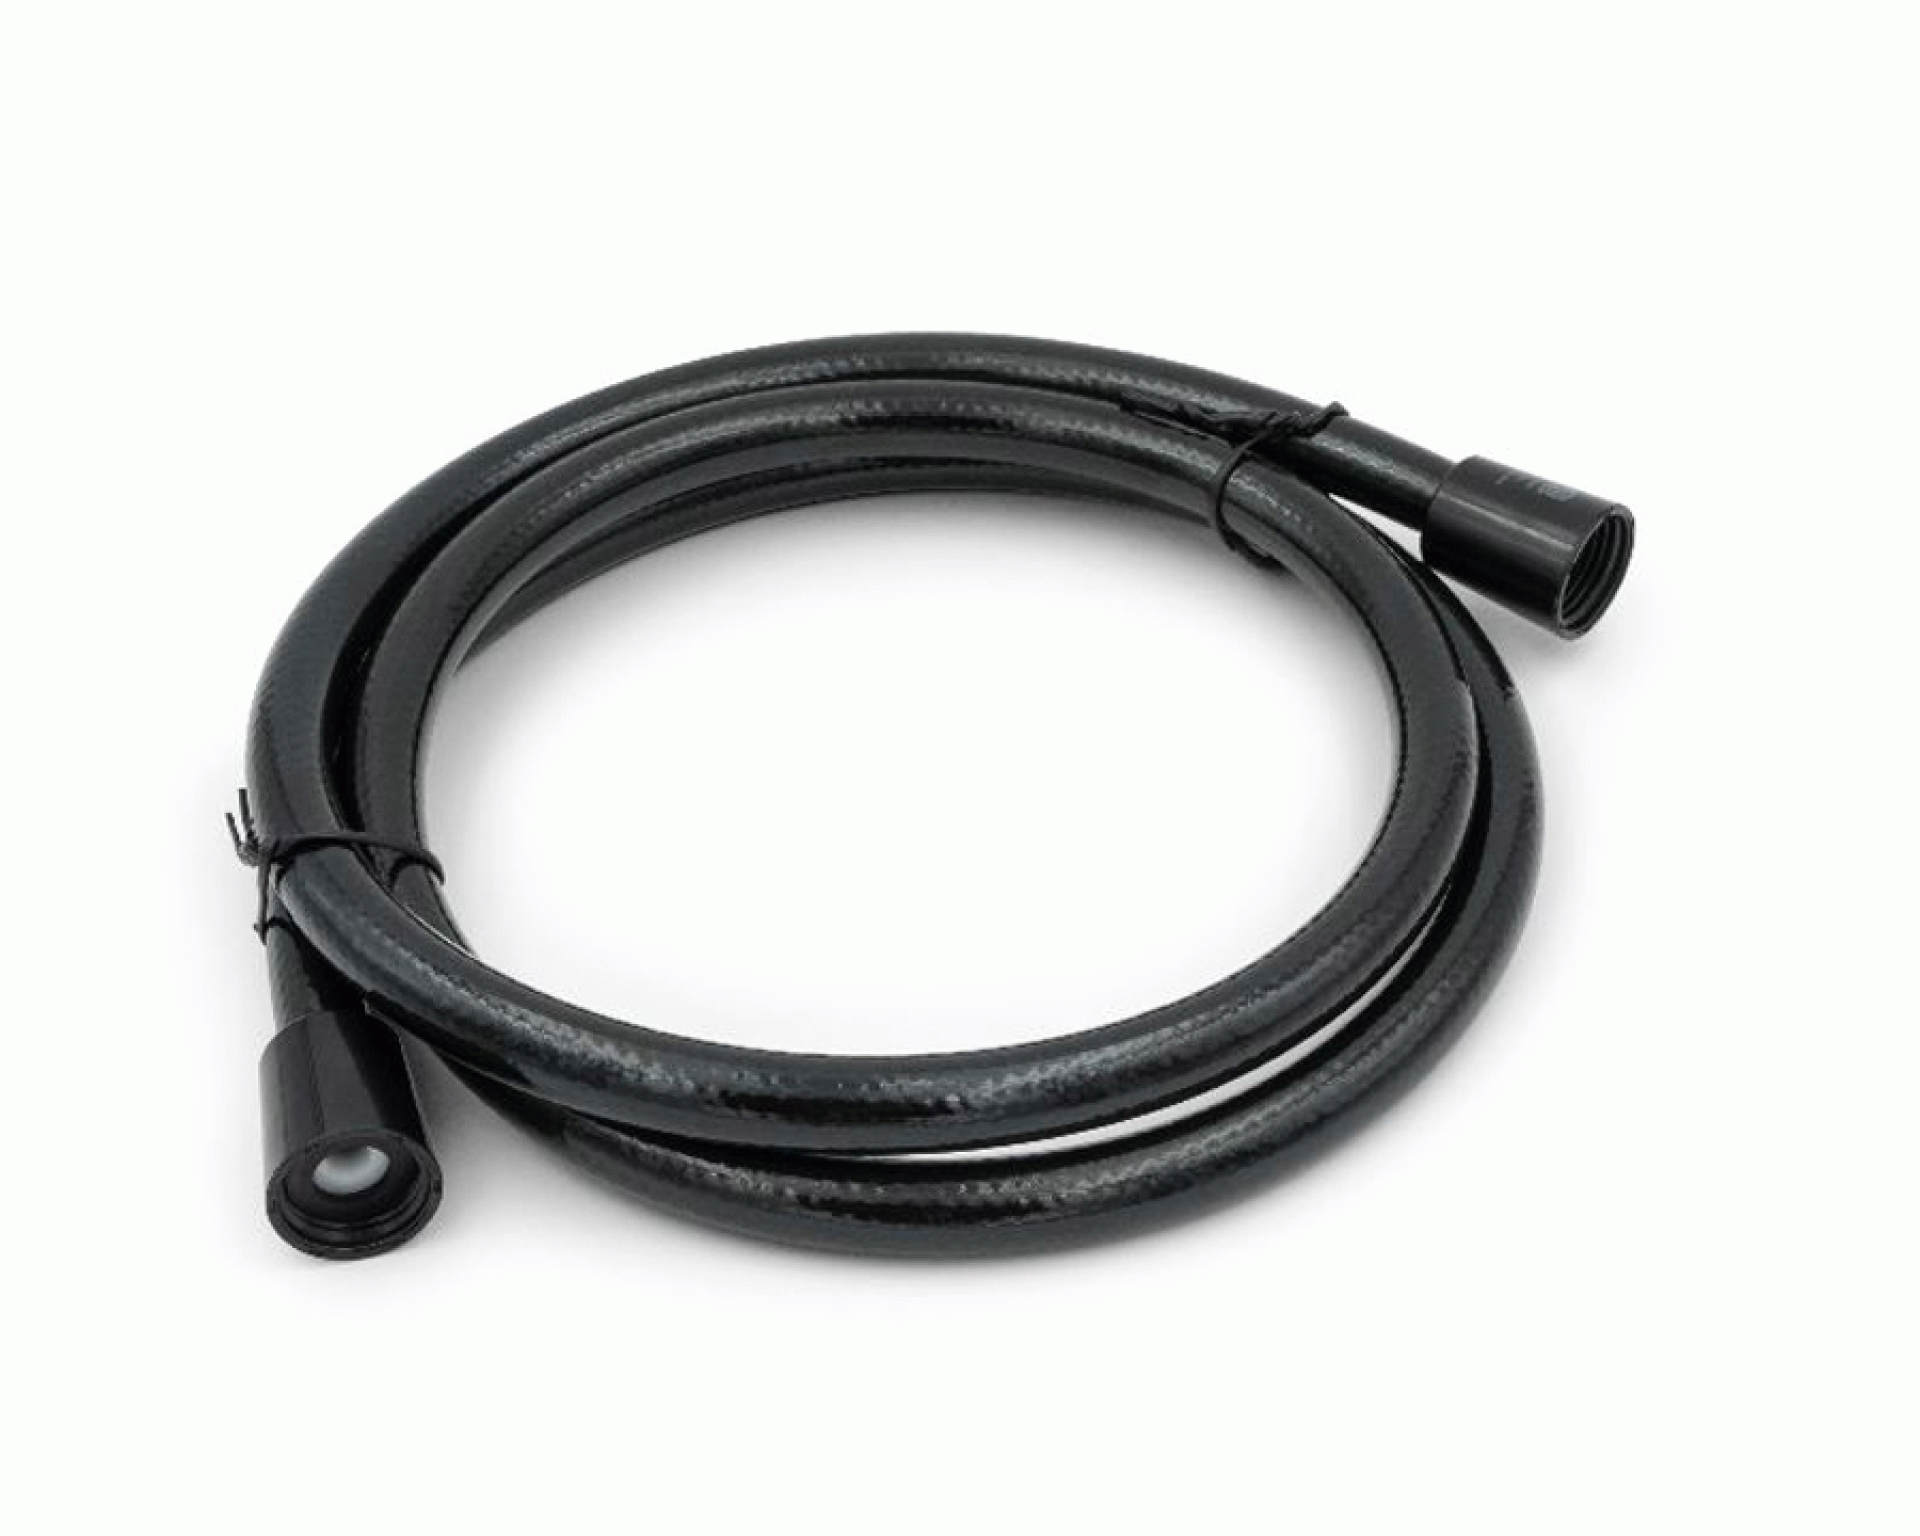 THETFORD CORP | 94200 | Shower Hose Replacement Black